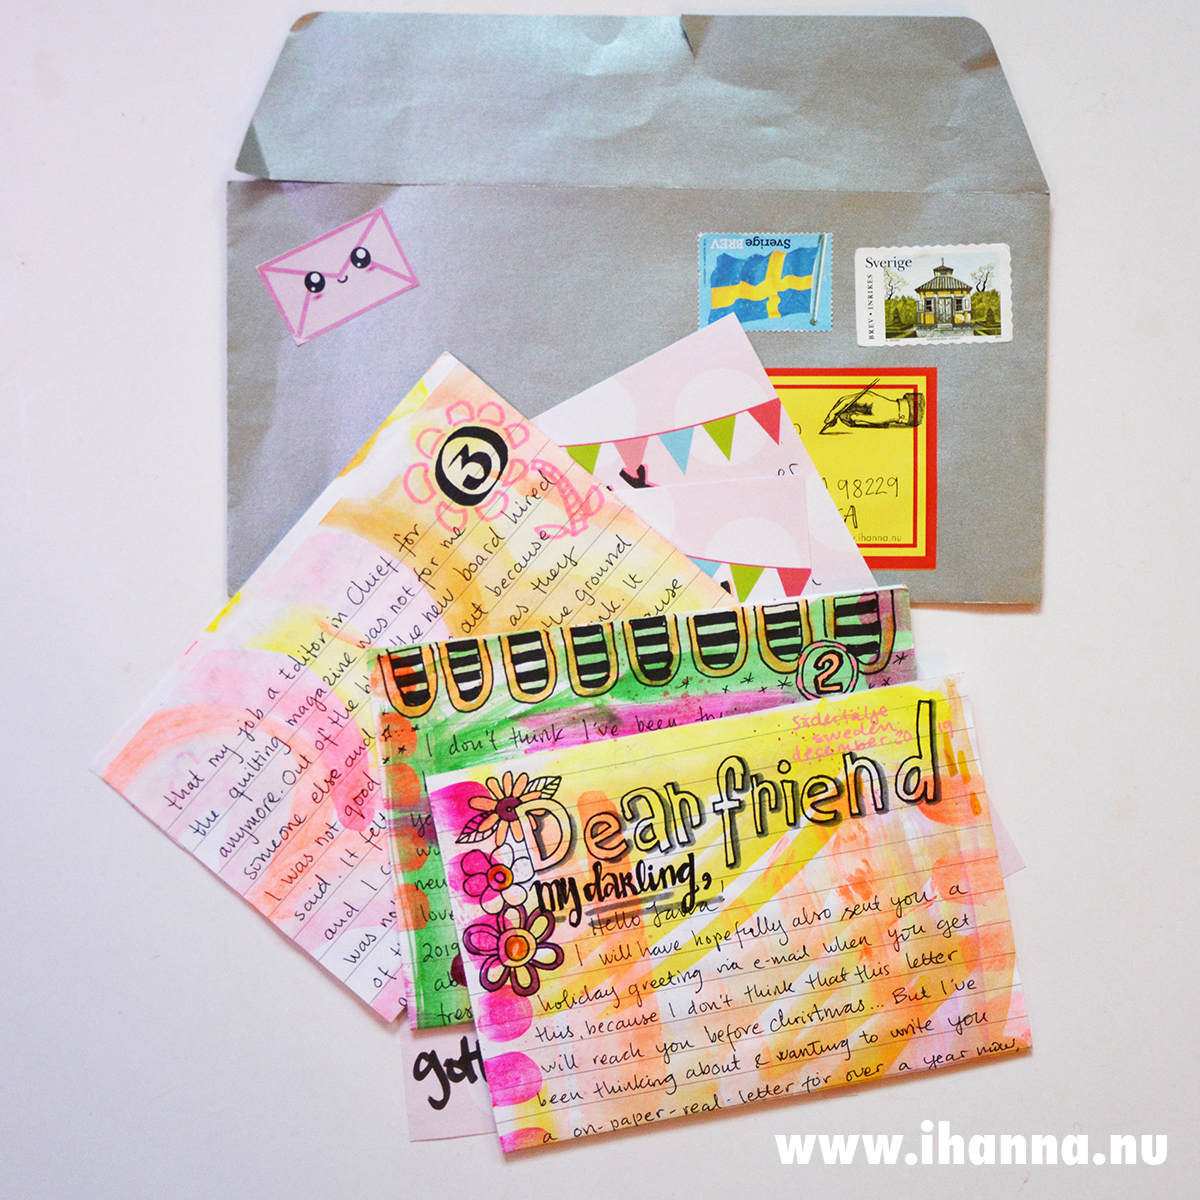 Letter, stamps and envelope from Sweden - all by iHanna